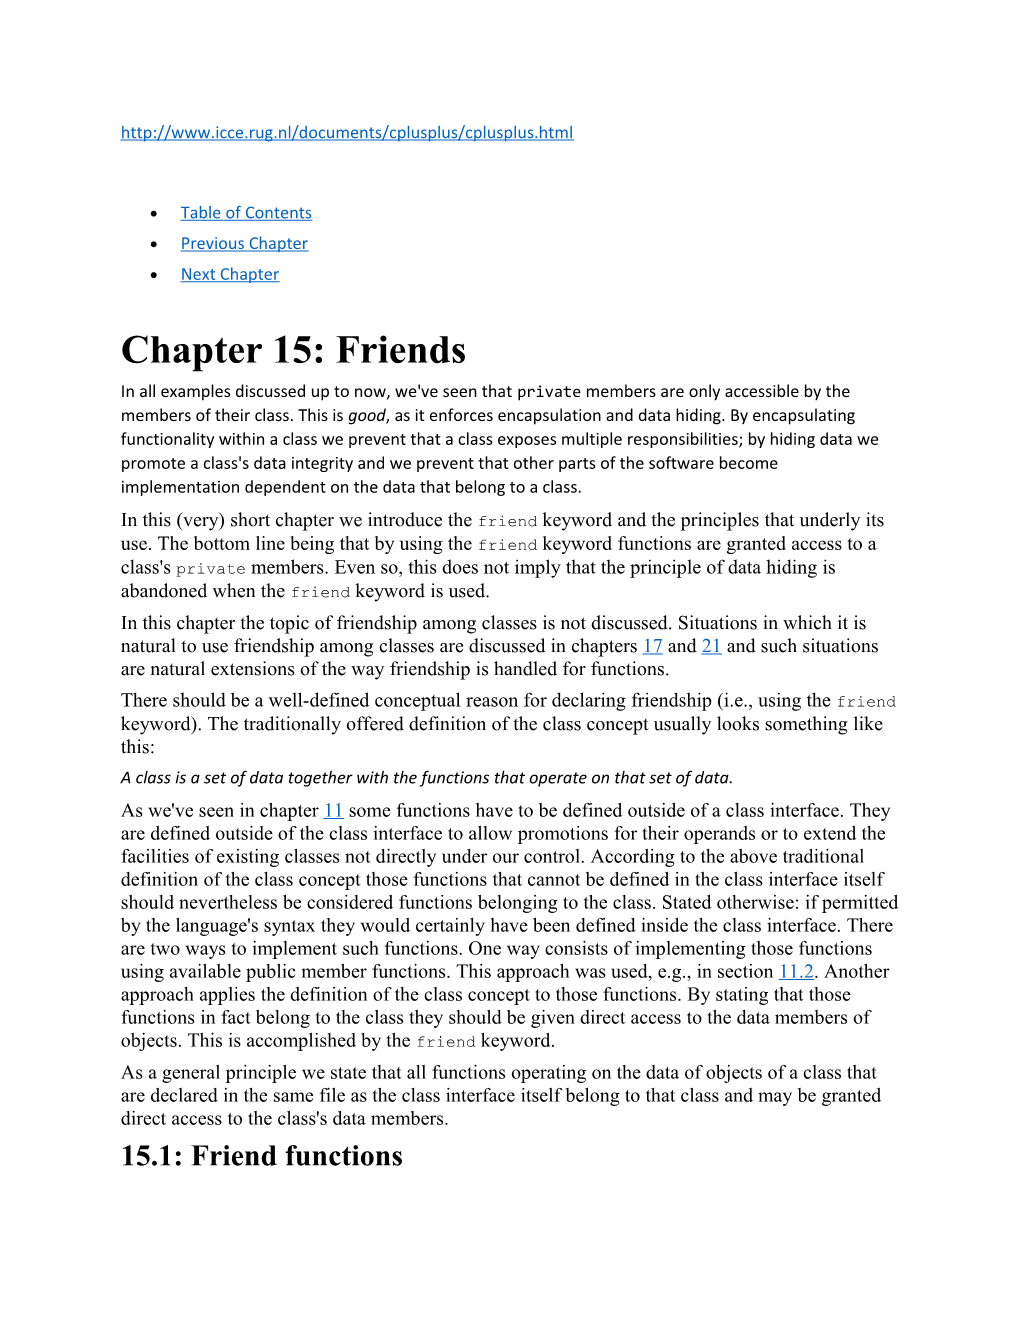 Chapter 15: Friends